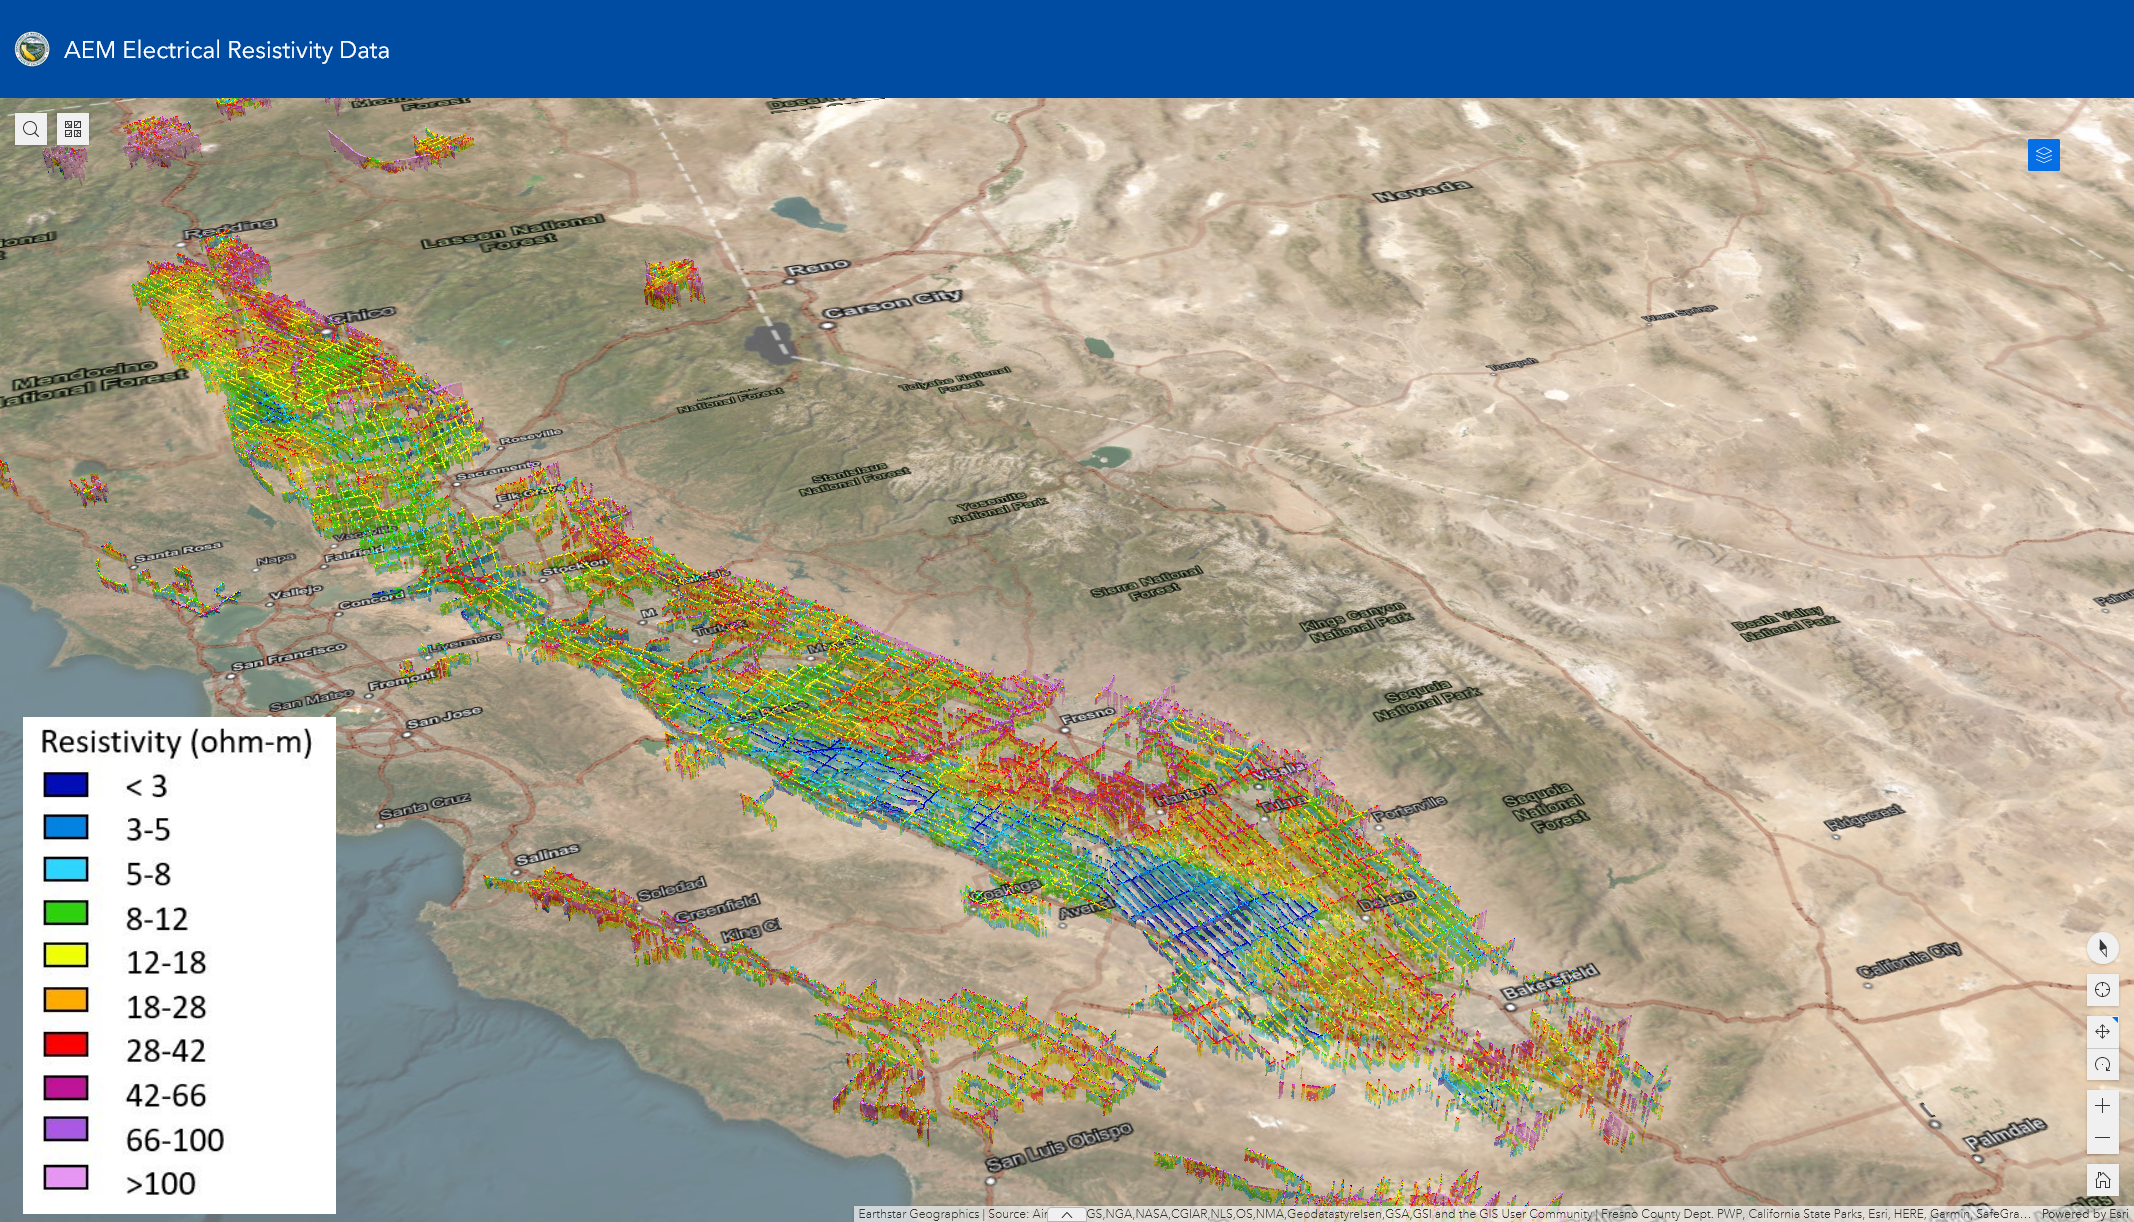 DWR’s Innovative Underground Aquifer Mapping Project Reaches Major Milestone: Data Now Available for Entire Central Valley